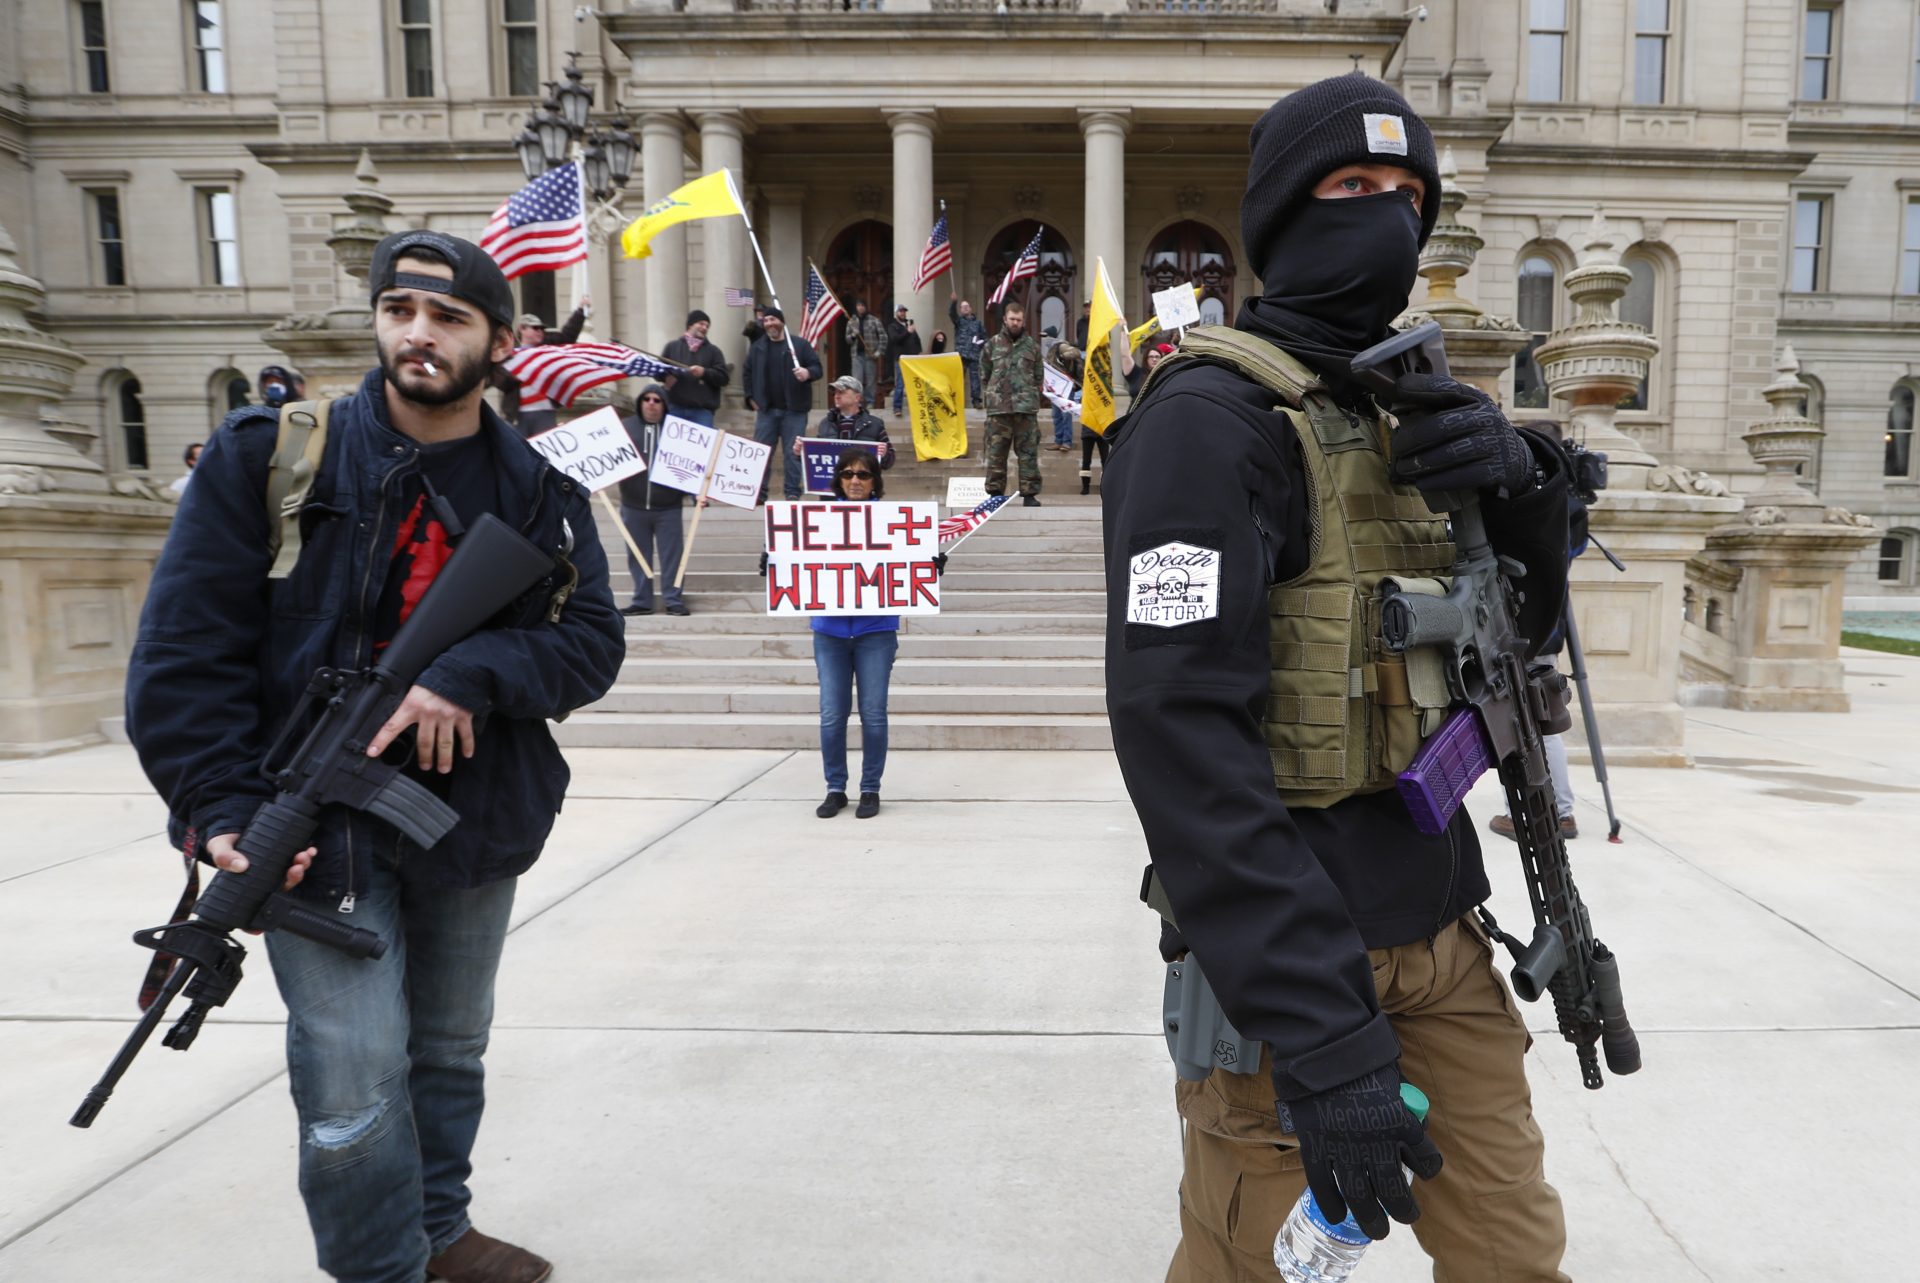 In this April 15, 2020 file photo, protesters carry rifles near the steps of the Michigan State Capitol building in Lansing, Mich. A plot to kidnap Michigan’s governor has put a focus on the security of governors who have faced protests and threats over their handling of the coronavirus pandemic. The threats have come from people who oppose business closures and restrictions on social gatherings.